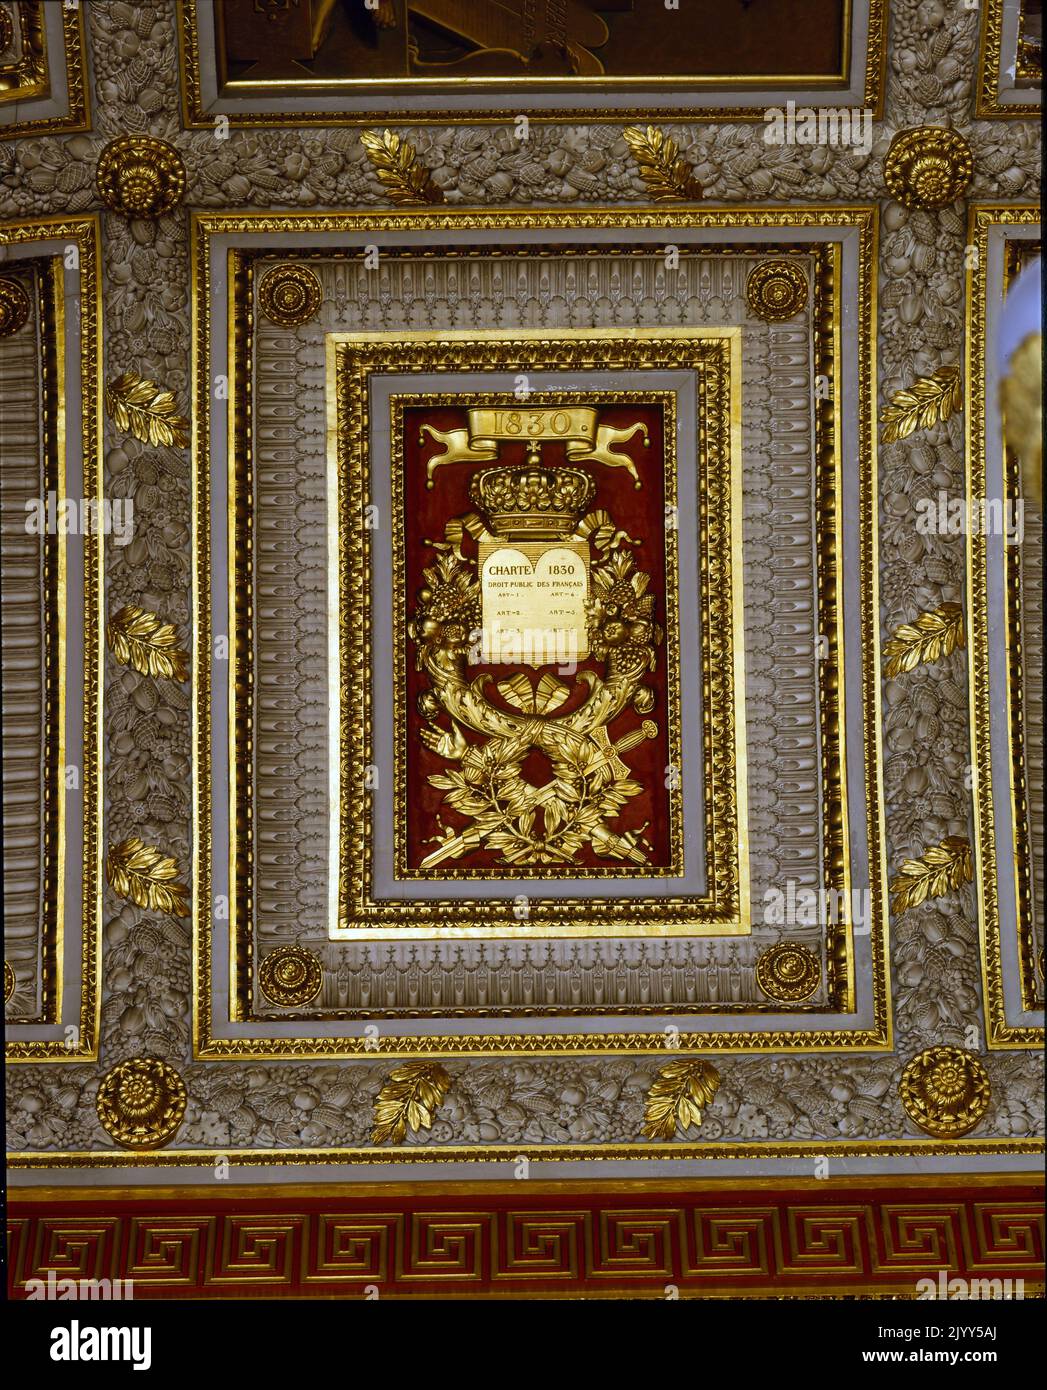 Detail from the Salle de 1830, Palace of Versailles. Versailles was a royal chateau in the Ile-de-France region of France. Versailles was the seat of political power in the Kingdom of France from 1682, when King Louis XIV moved the royal court from Paris, until the royal family was forced to return to the capital in October 1789, within three months after the beginning of the French Revolution. In the 19th century the Museum of the History of France was founded in Versailles, at the behest of Louis-Philippe I, who ascended to the throne in 1830. The entire second floor (premier etage) of the A Stock Photo